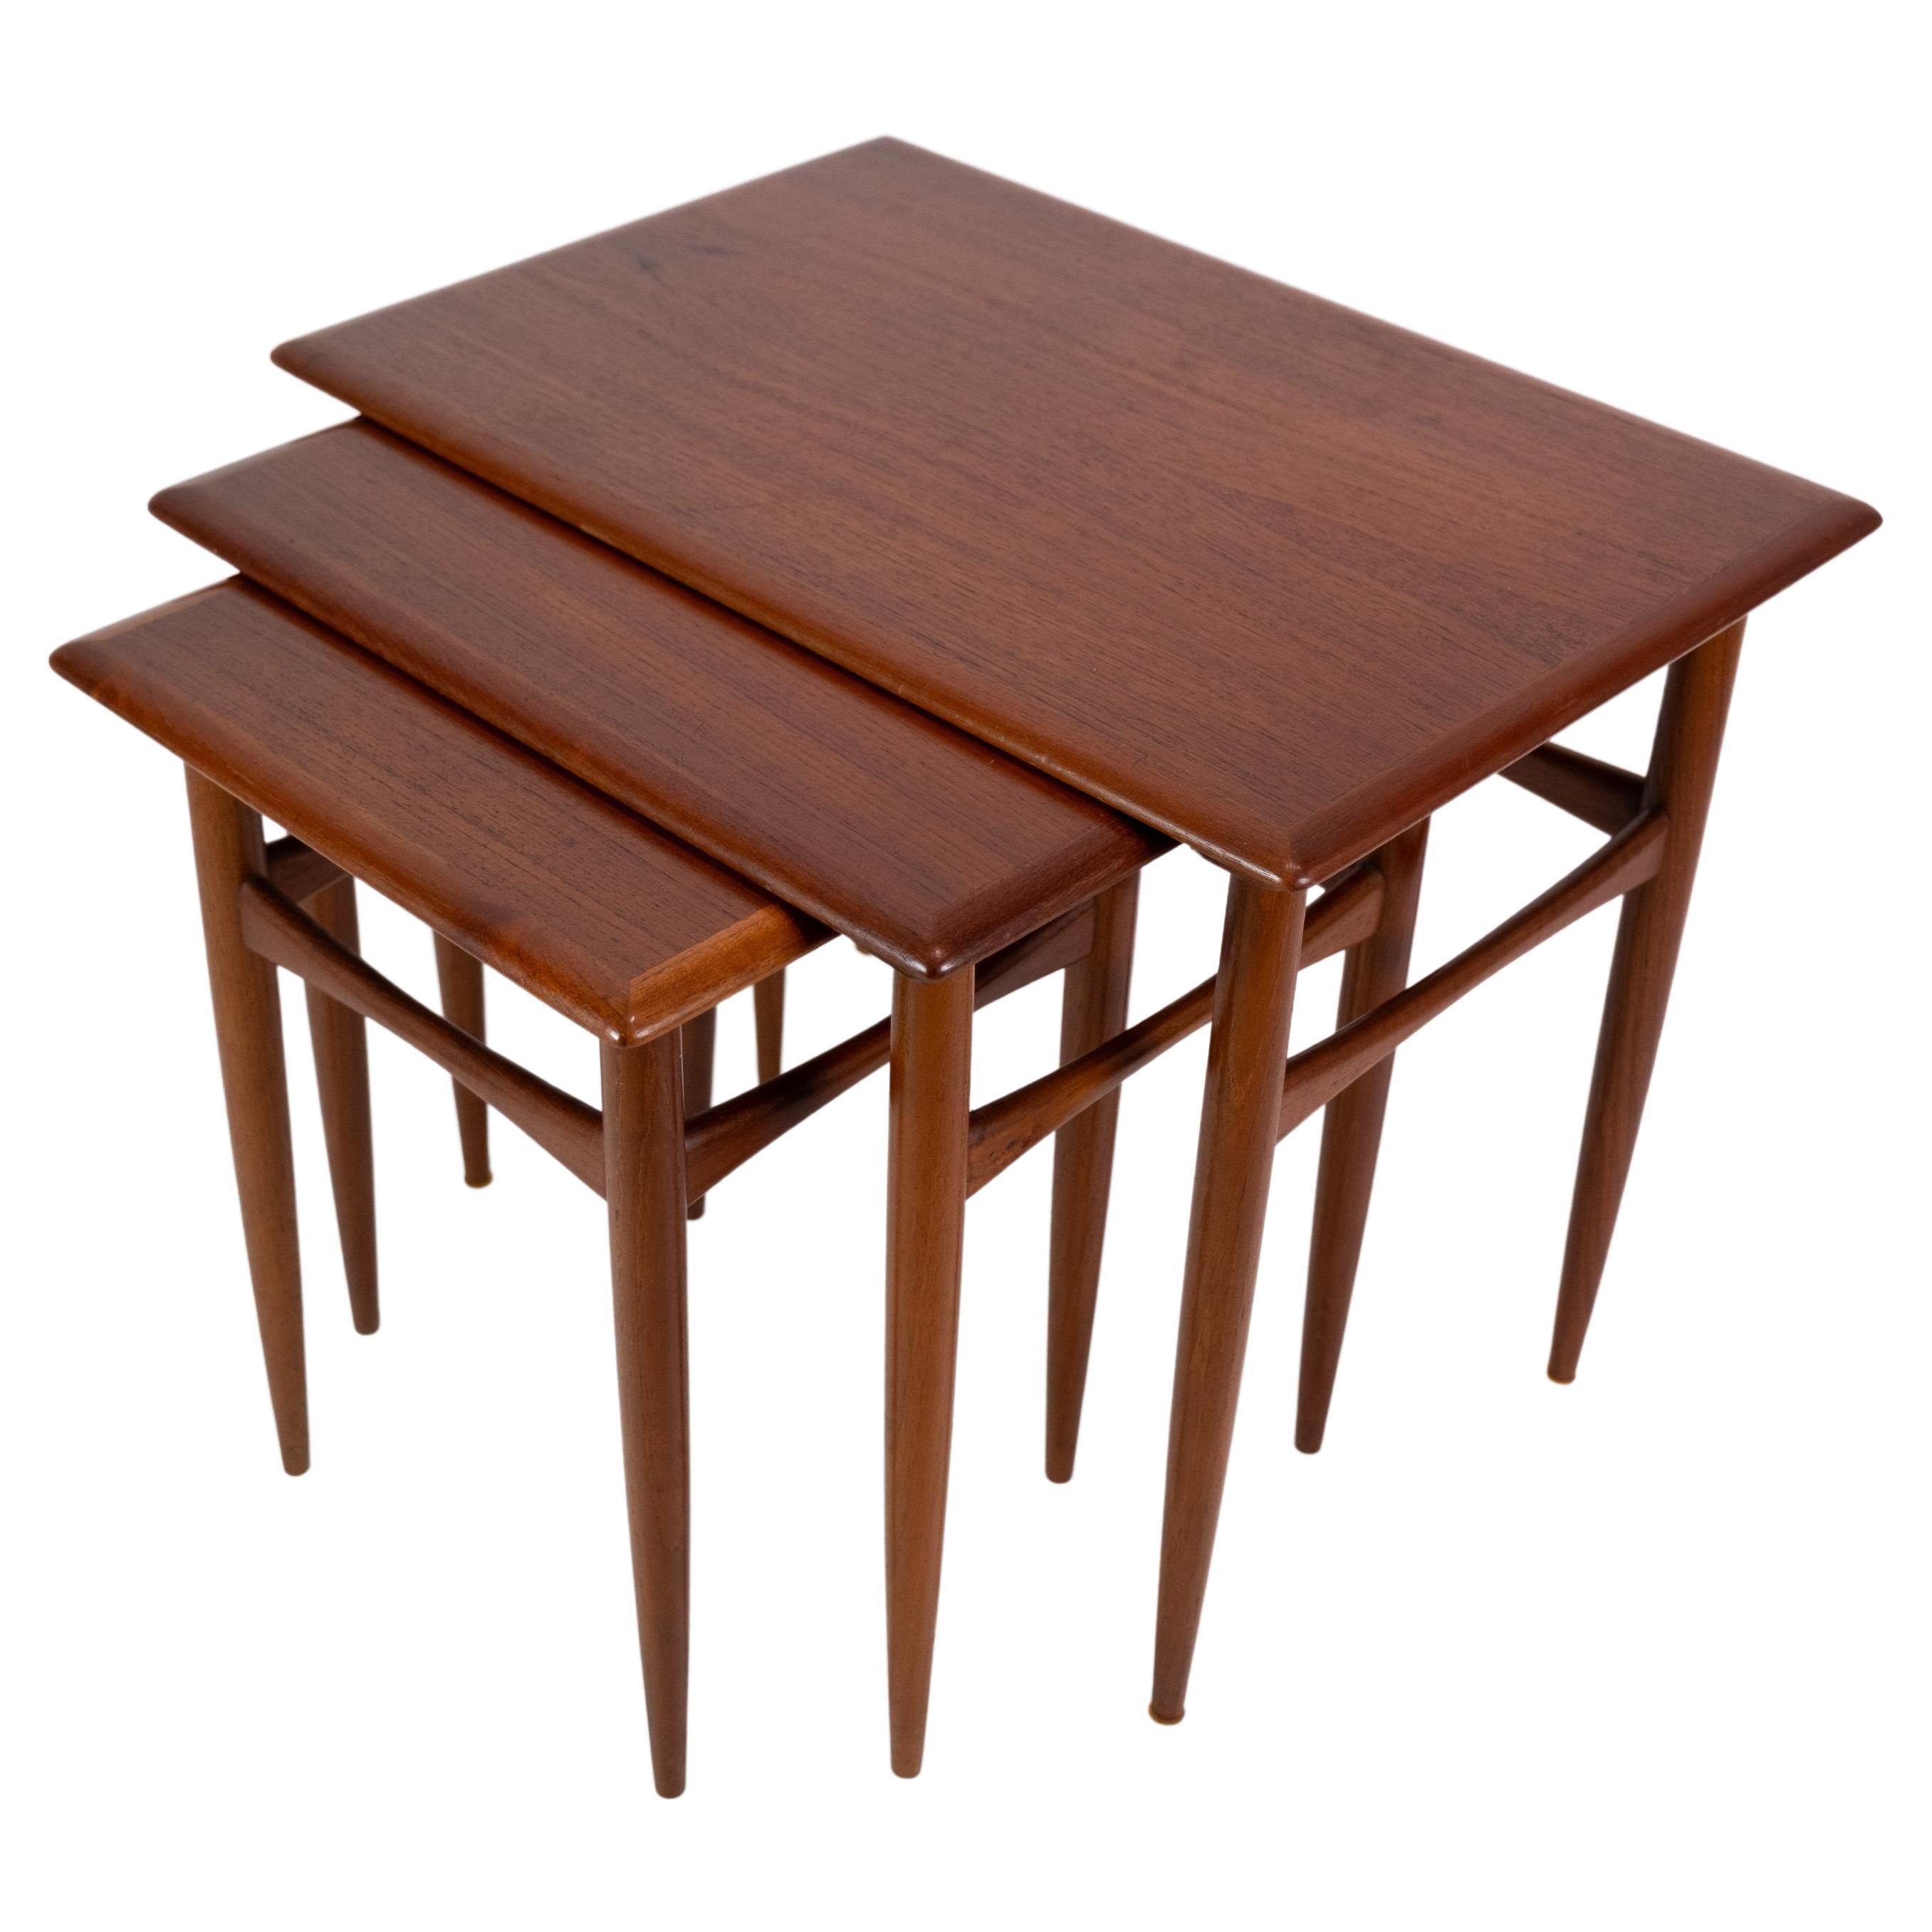 Nesting Tables / Stacking Tables of Danish Design in Teak Wood From The 1960's  For Sale